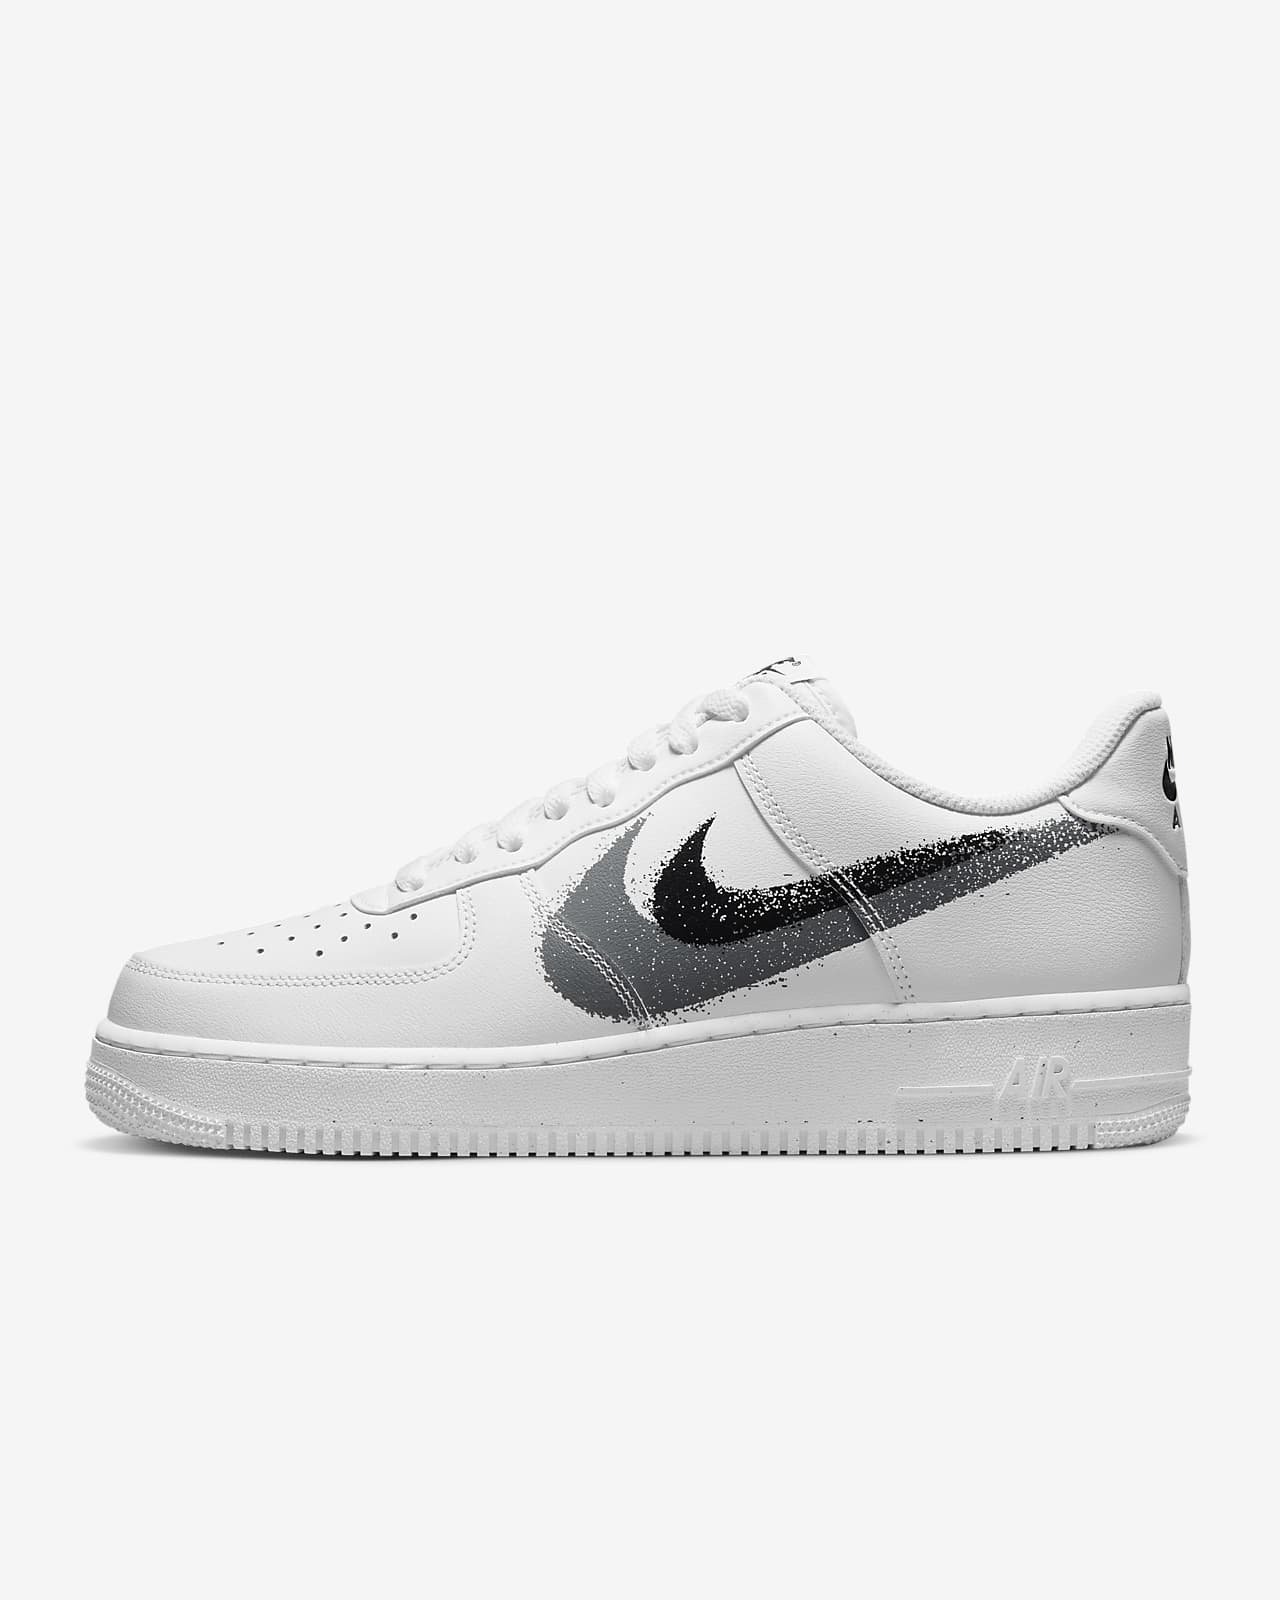 Chaussure Nike Air Force 1 '07 homme. FR